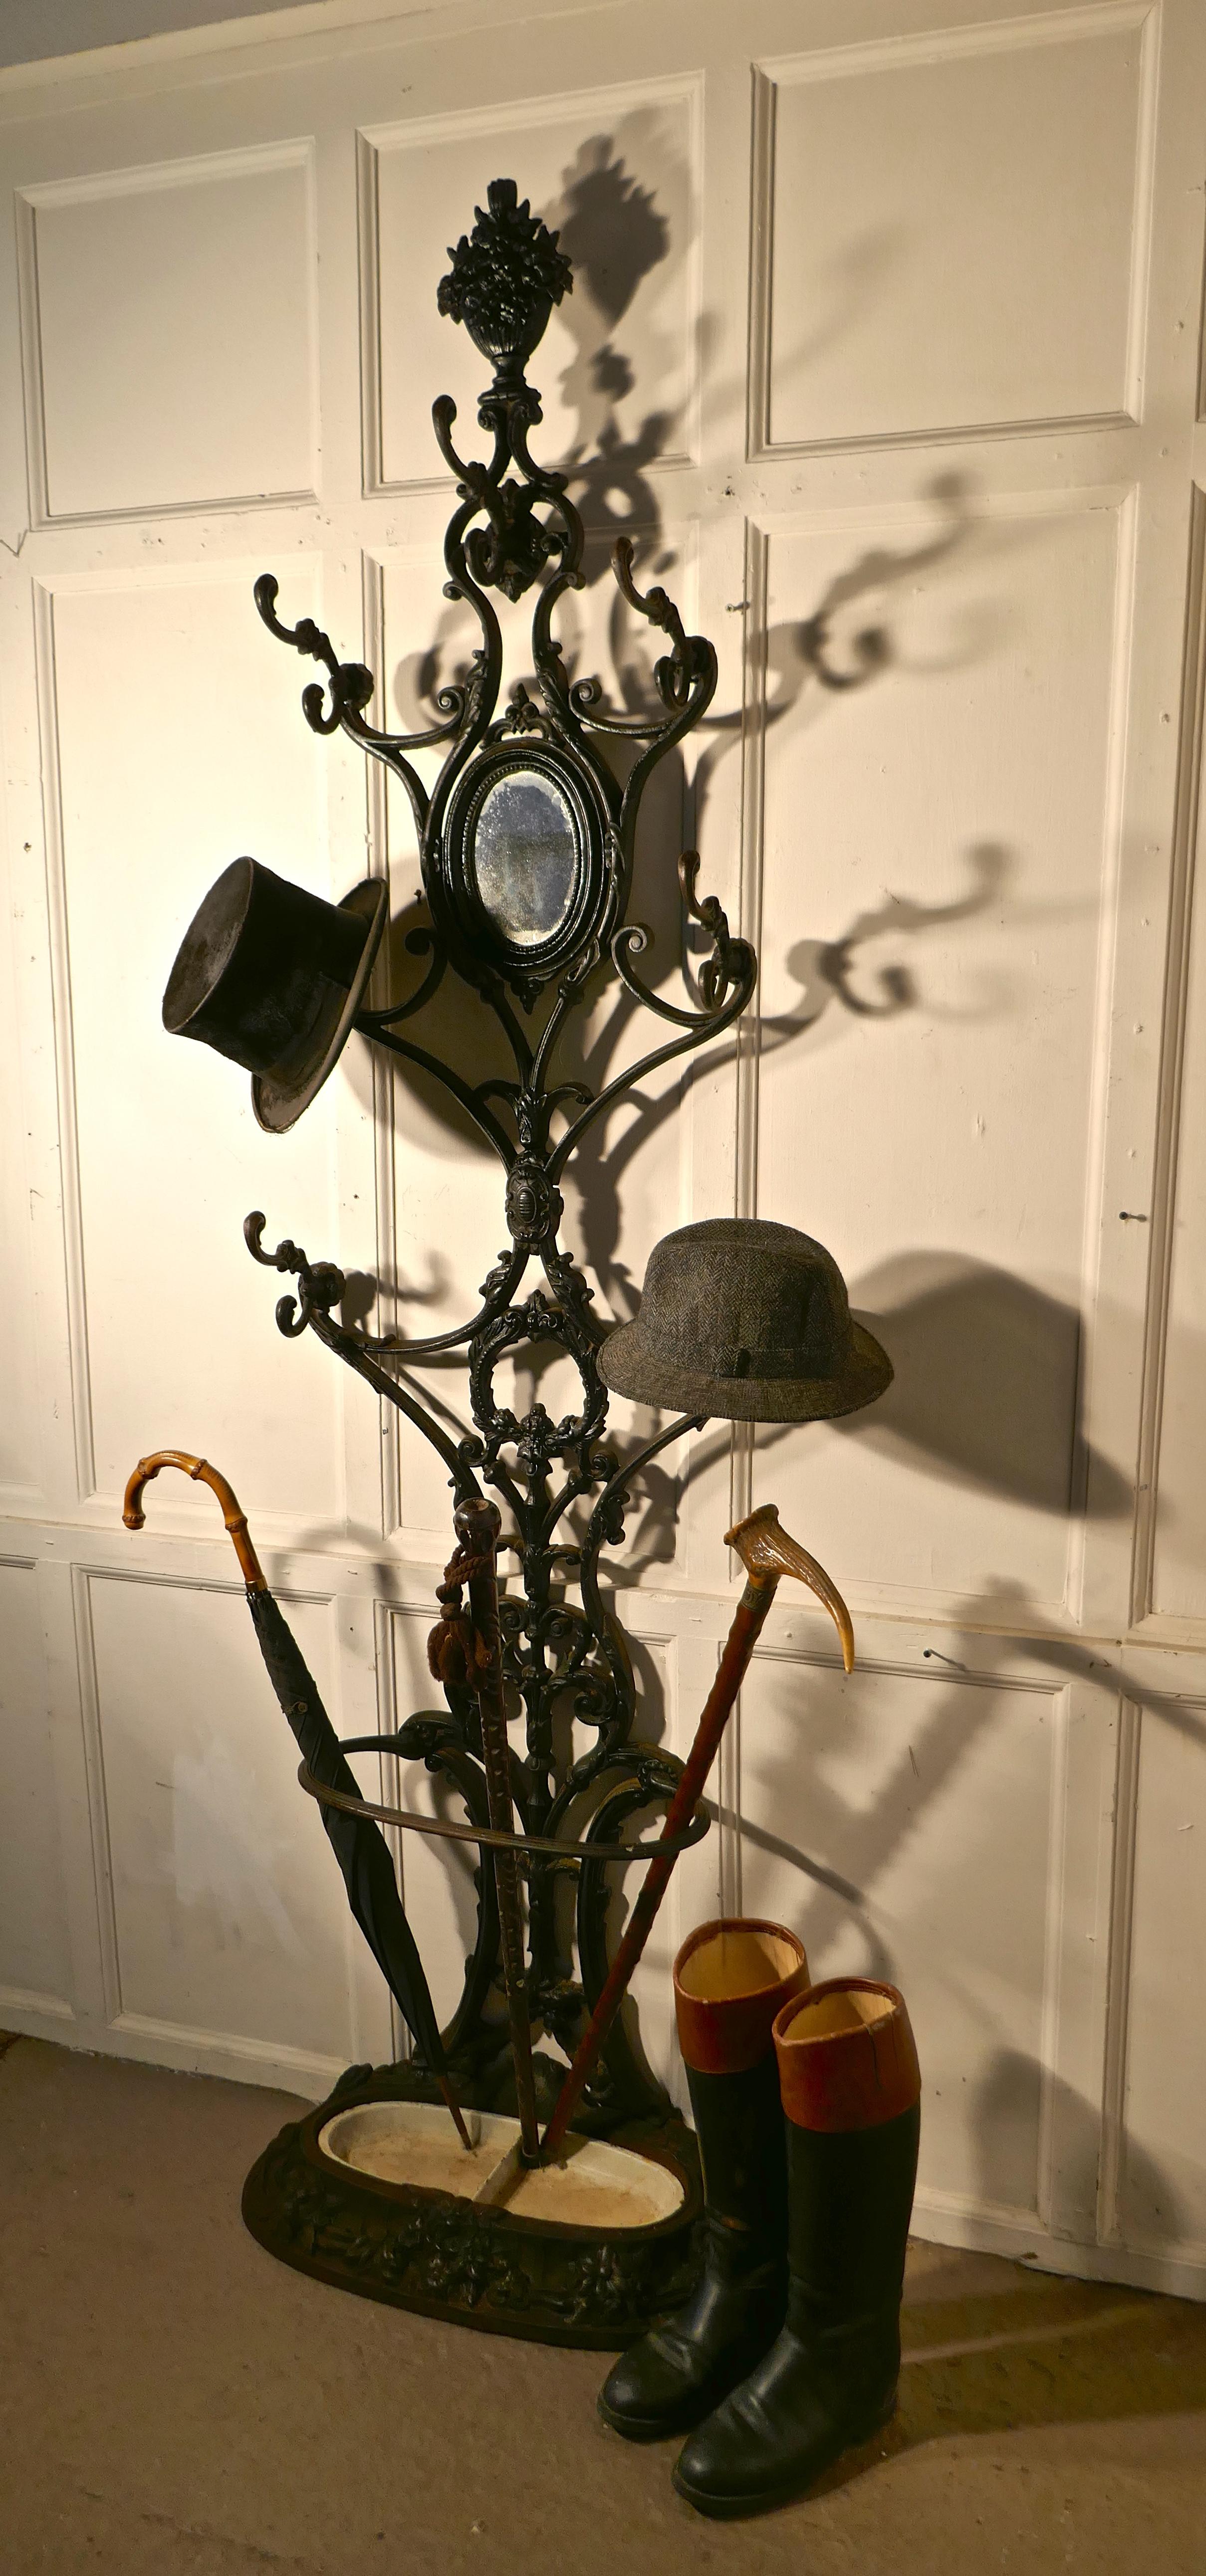 Superb French cast iron hall stand, signed Corneau Freres Charleville


An exceptional quality French, 19th century cast iron hall stand, signed Corneau Freres Charleville

Made in France circa 1870, and signed on the bottom 